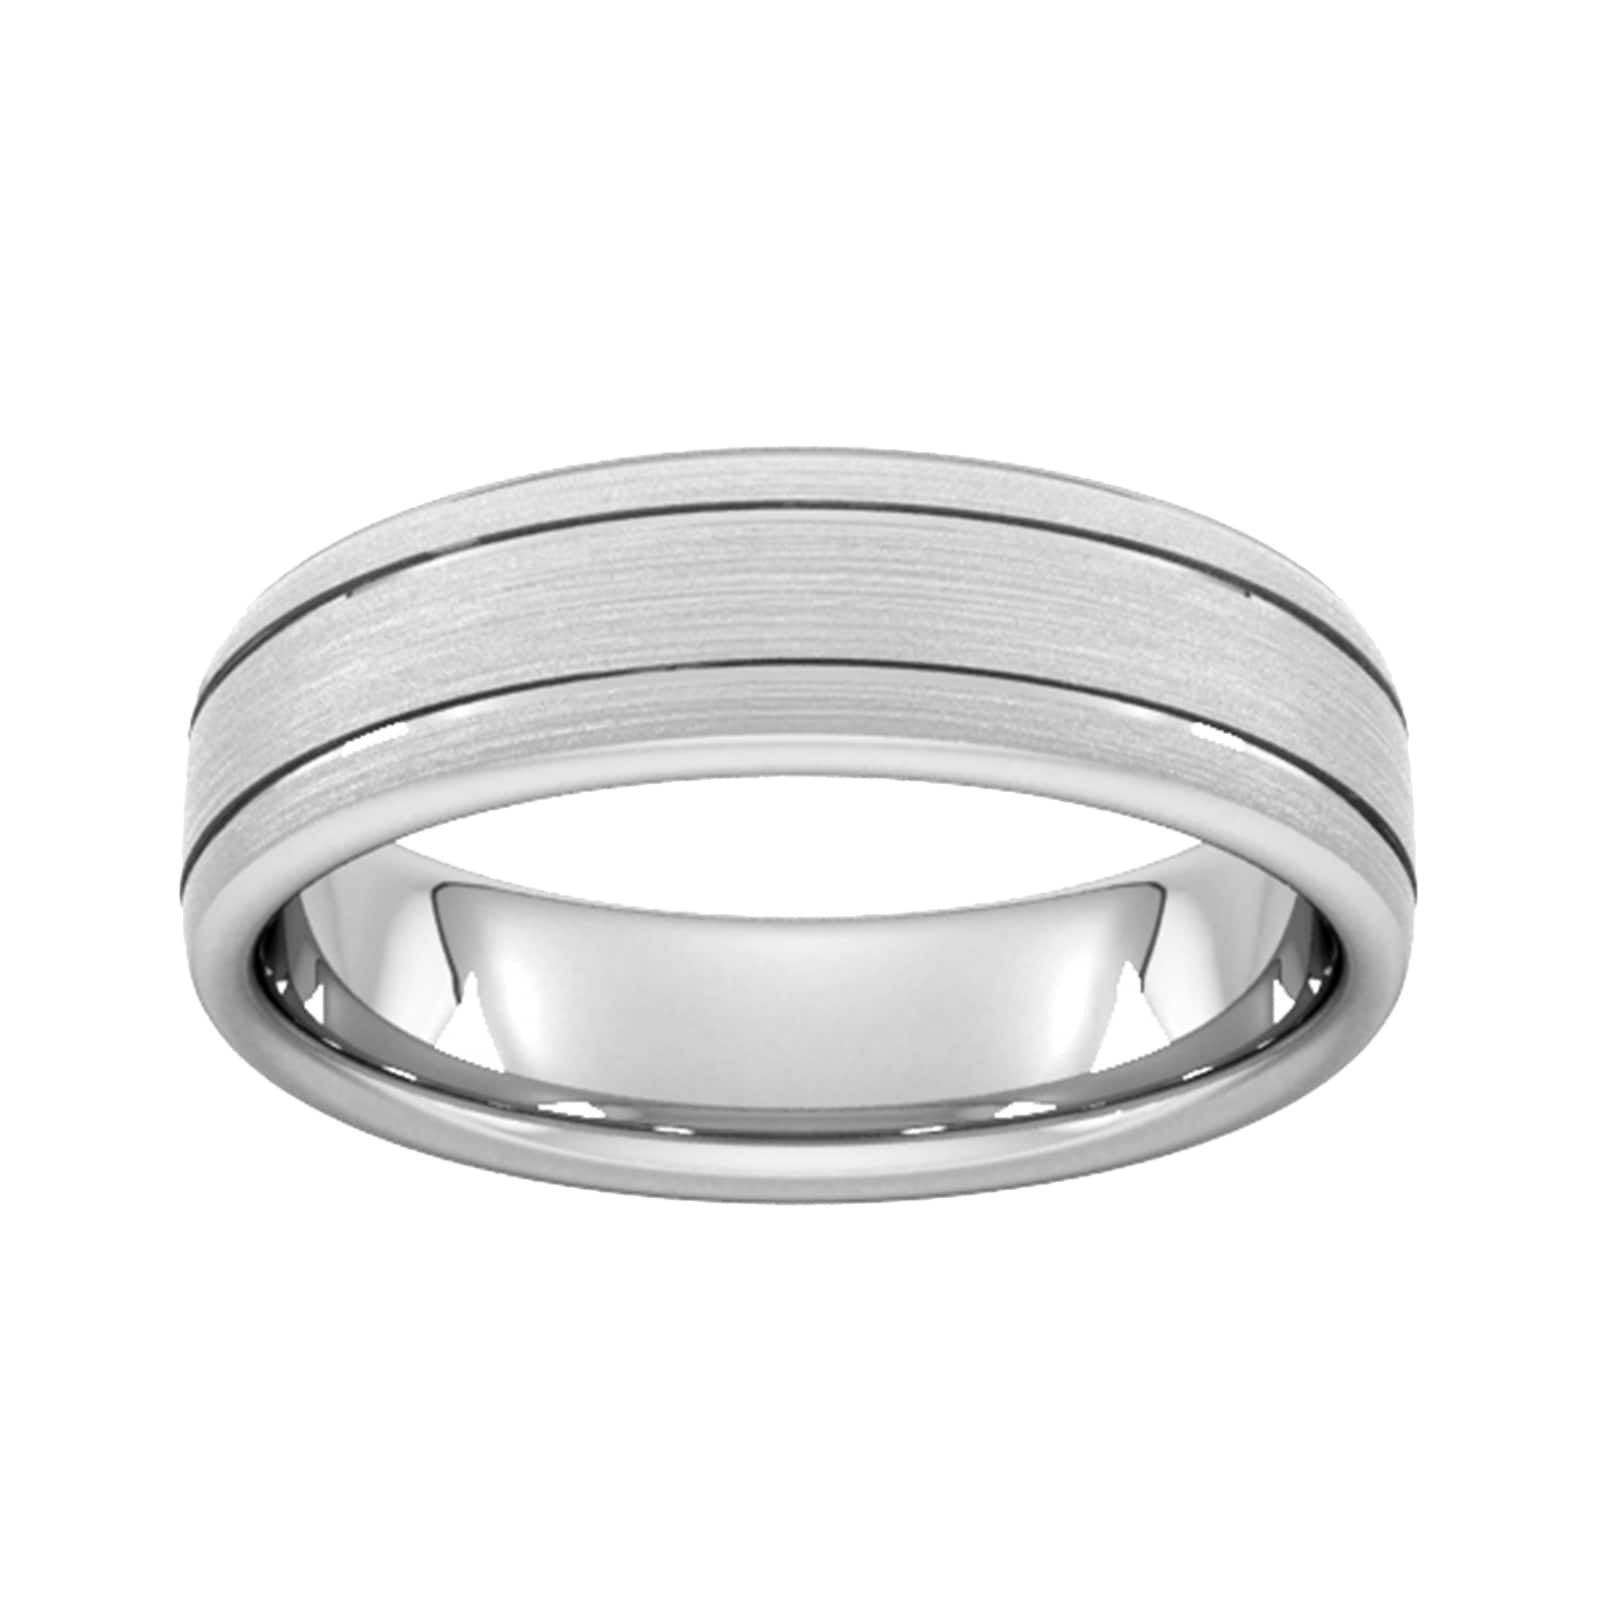 6mm Traditional Court Heavy Matt Finish With Double Grooves Wedding Ring In 18 Carat White Gold - Ring Size Q